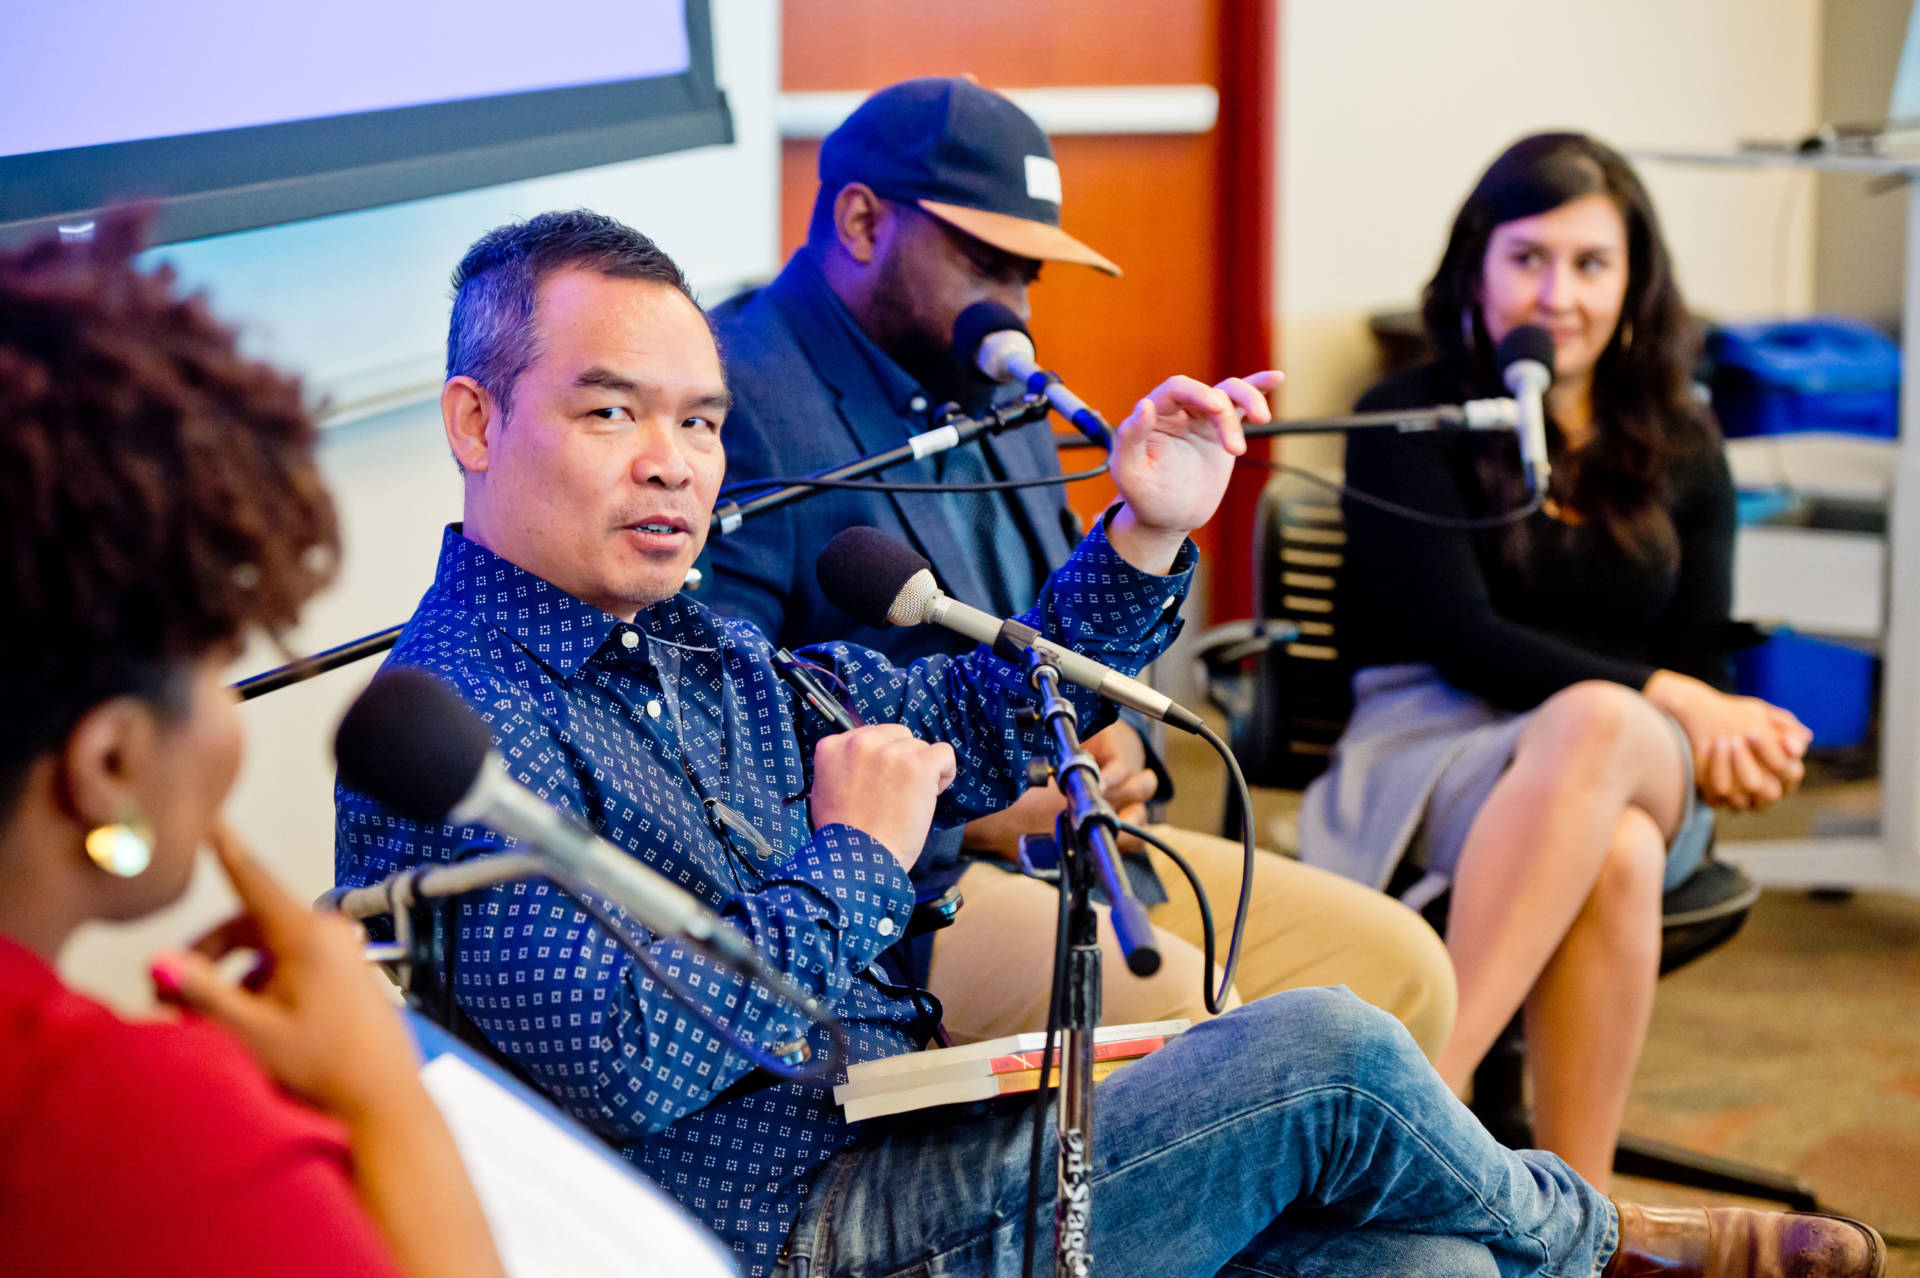 Andrew Lam, Carvell Wallace and Cristina Mora discuss demographic shifts with KQED's Tonya Mosley on April 25, 2018. Alain McLaughlin/Alain McLaughlin Photography Inc